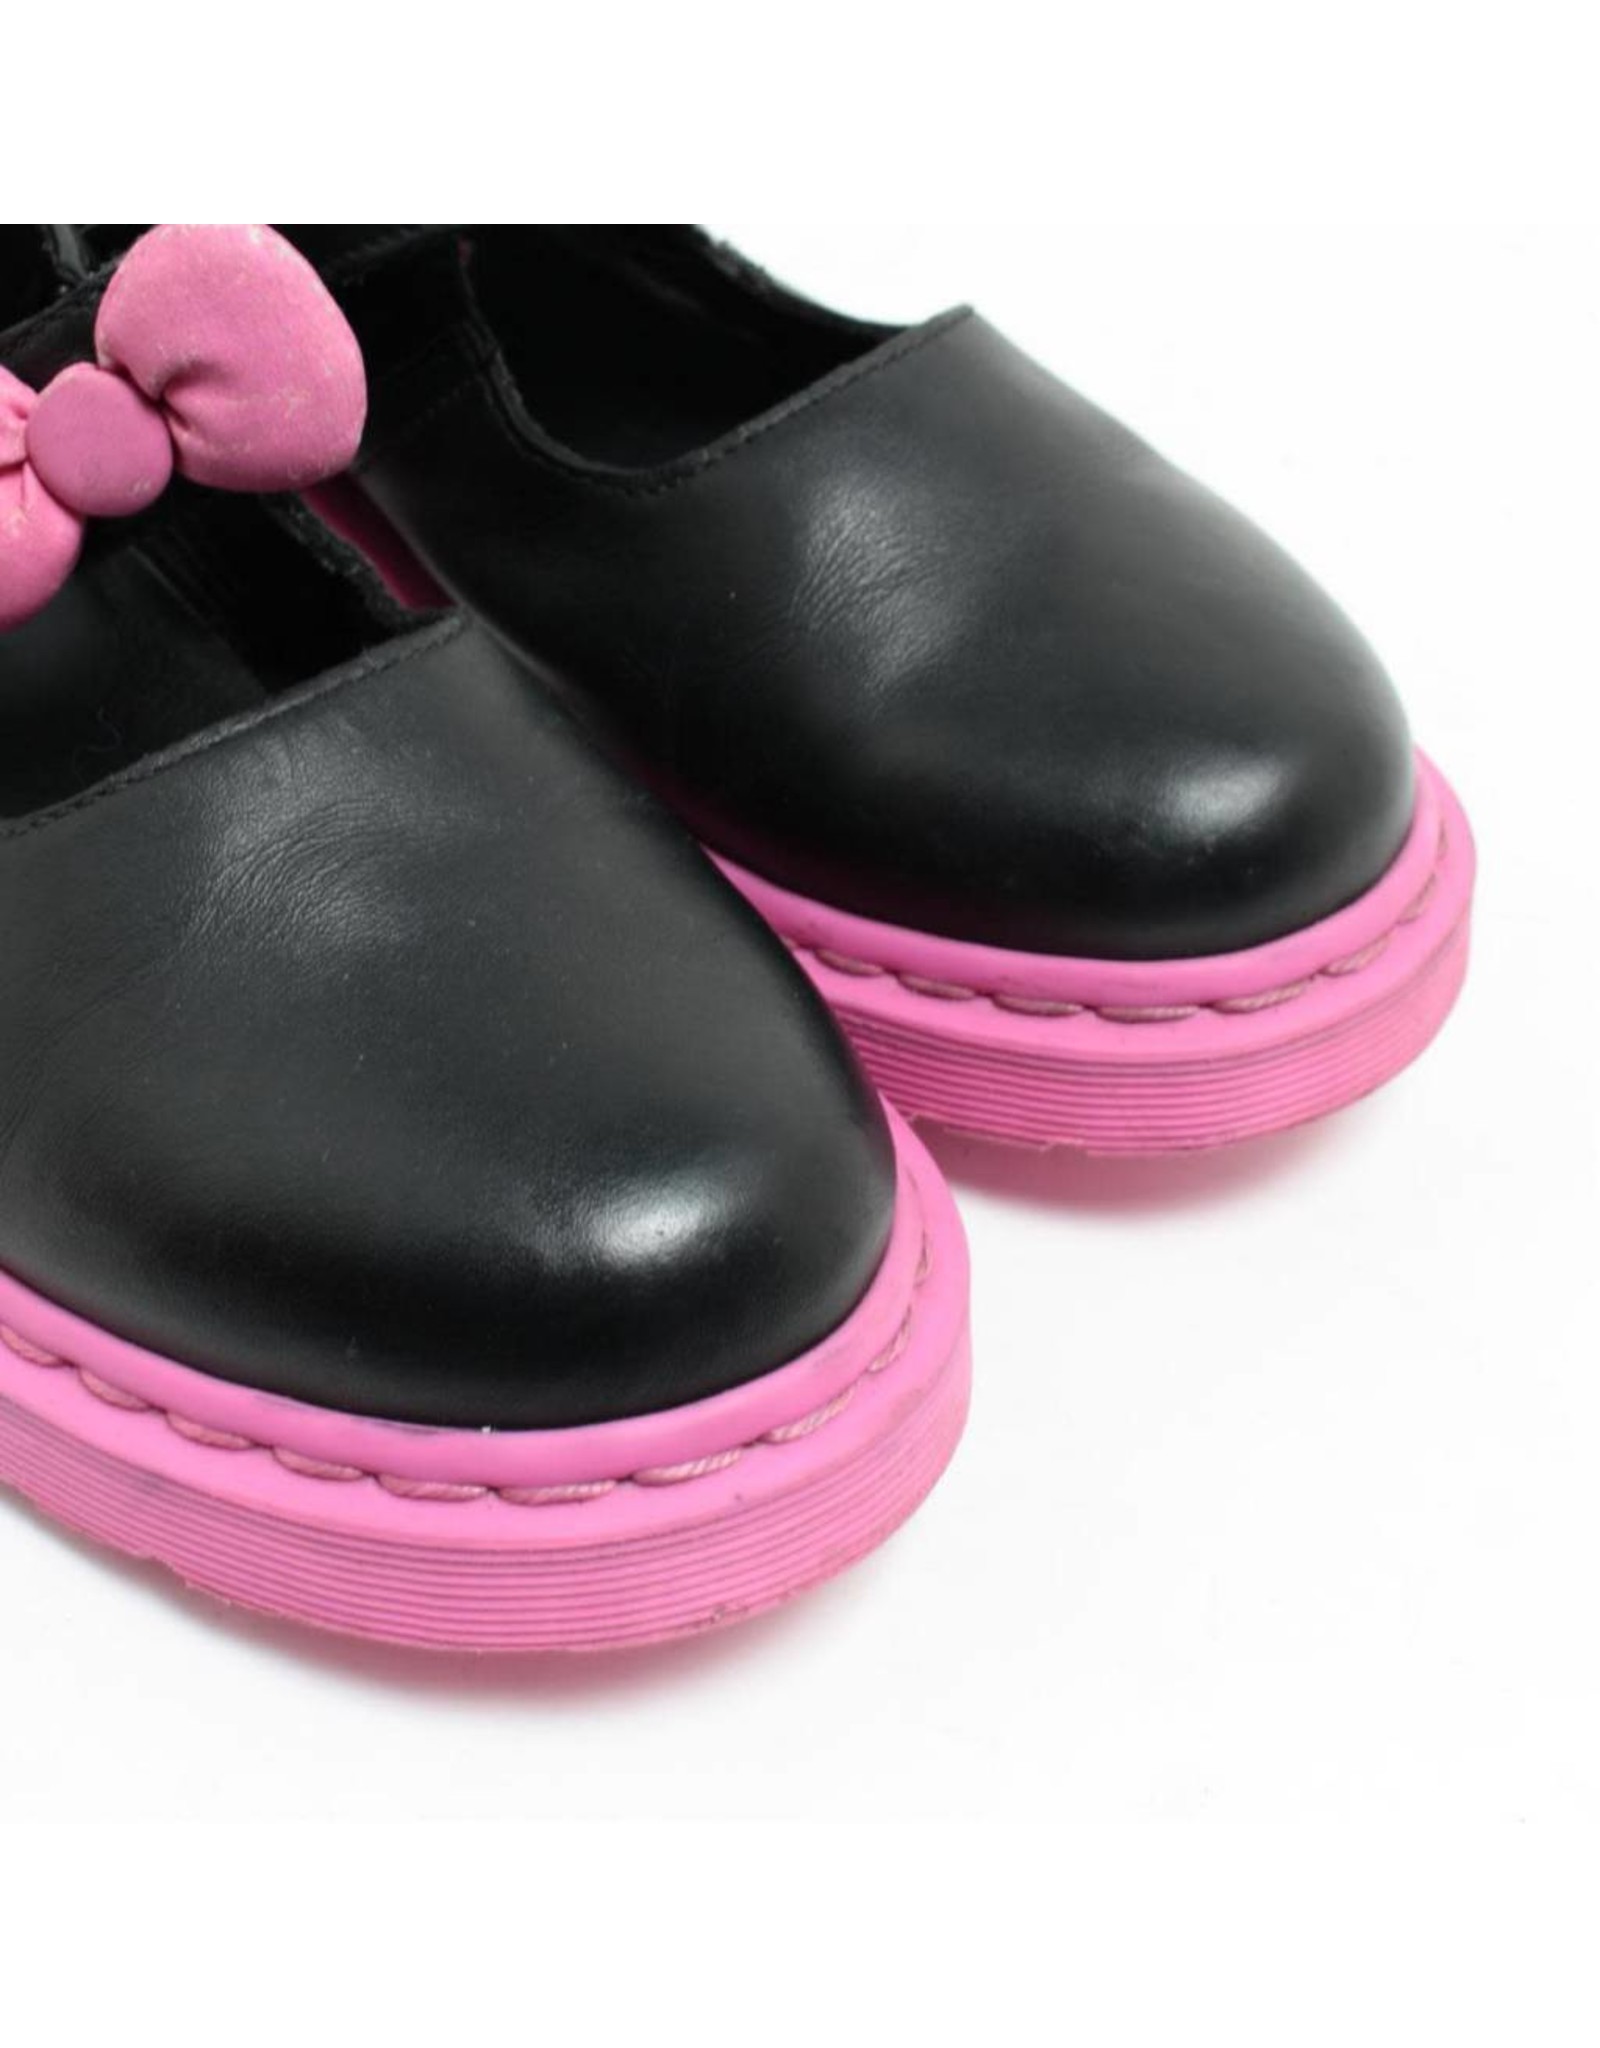 DR. MARTENS MARY-JANE PINK HELLO KITTY 207HK-R13768001